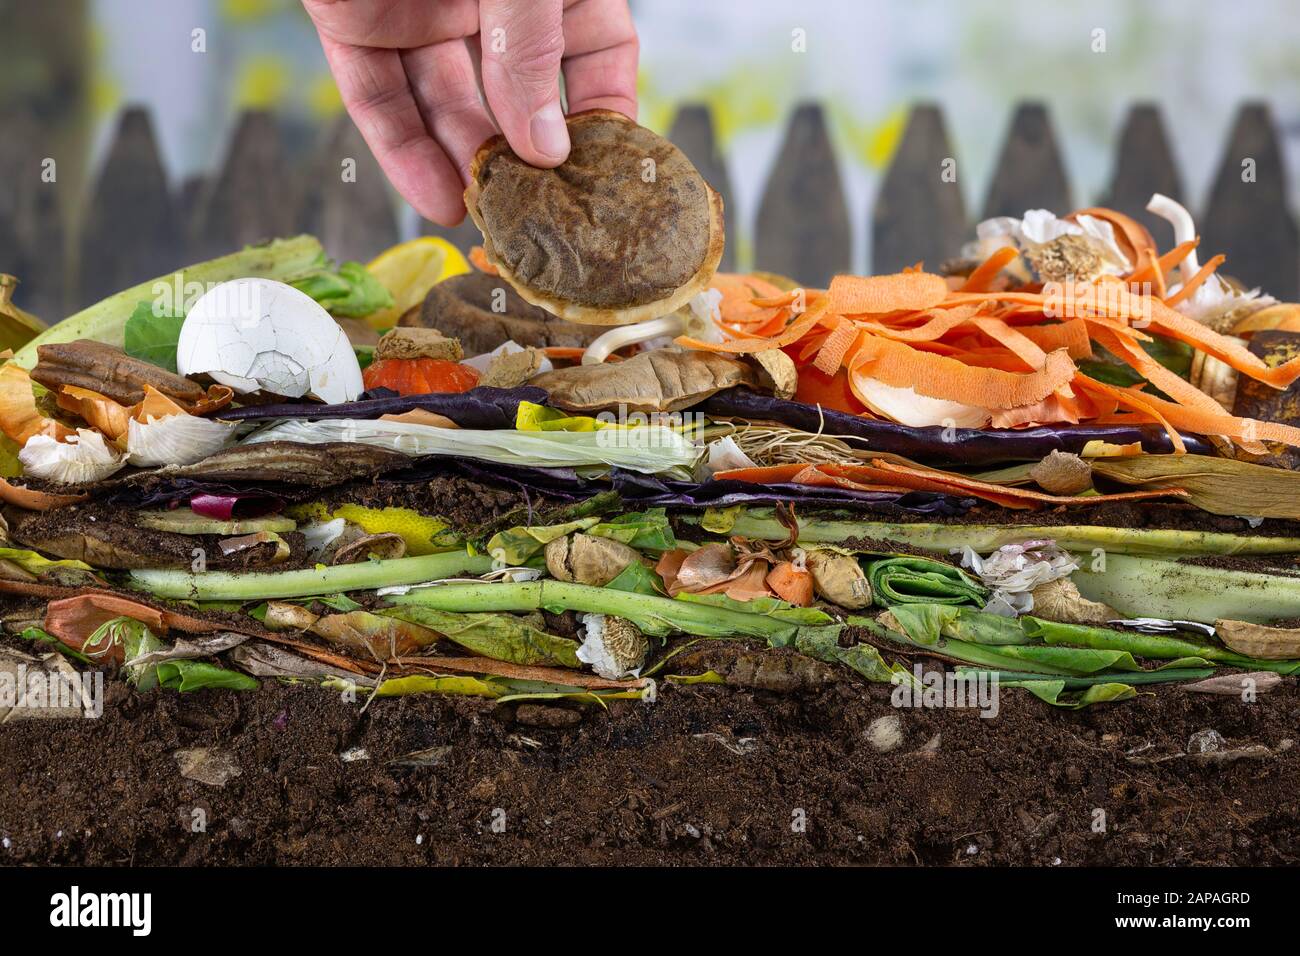 Male hand adding a biodegradable coffeepad to a colorful compost heap consisting of rotting kitchen leftovers Stock Photo